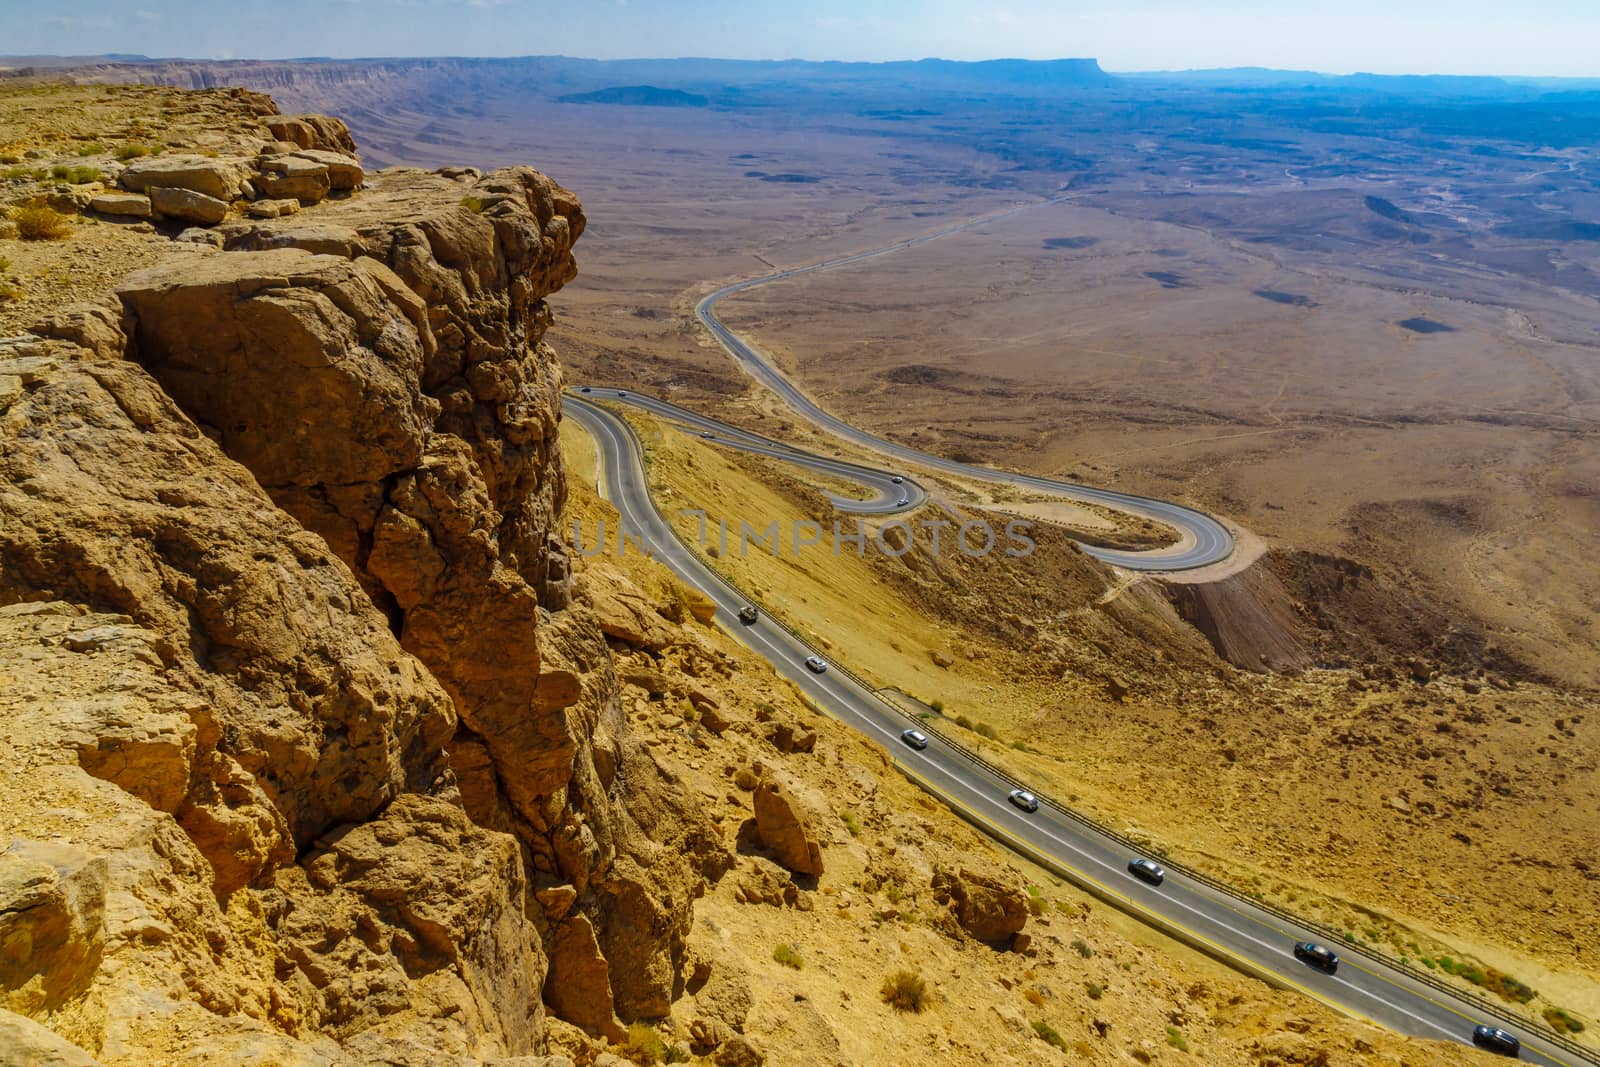 Cliffs, landscape, and hairpinned road in Makhtesh (crater) Ramo by RnDmS